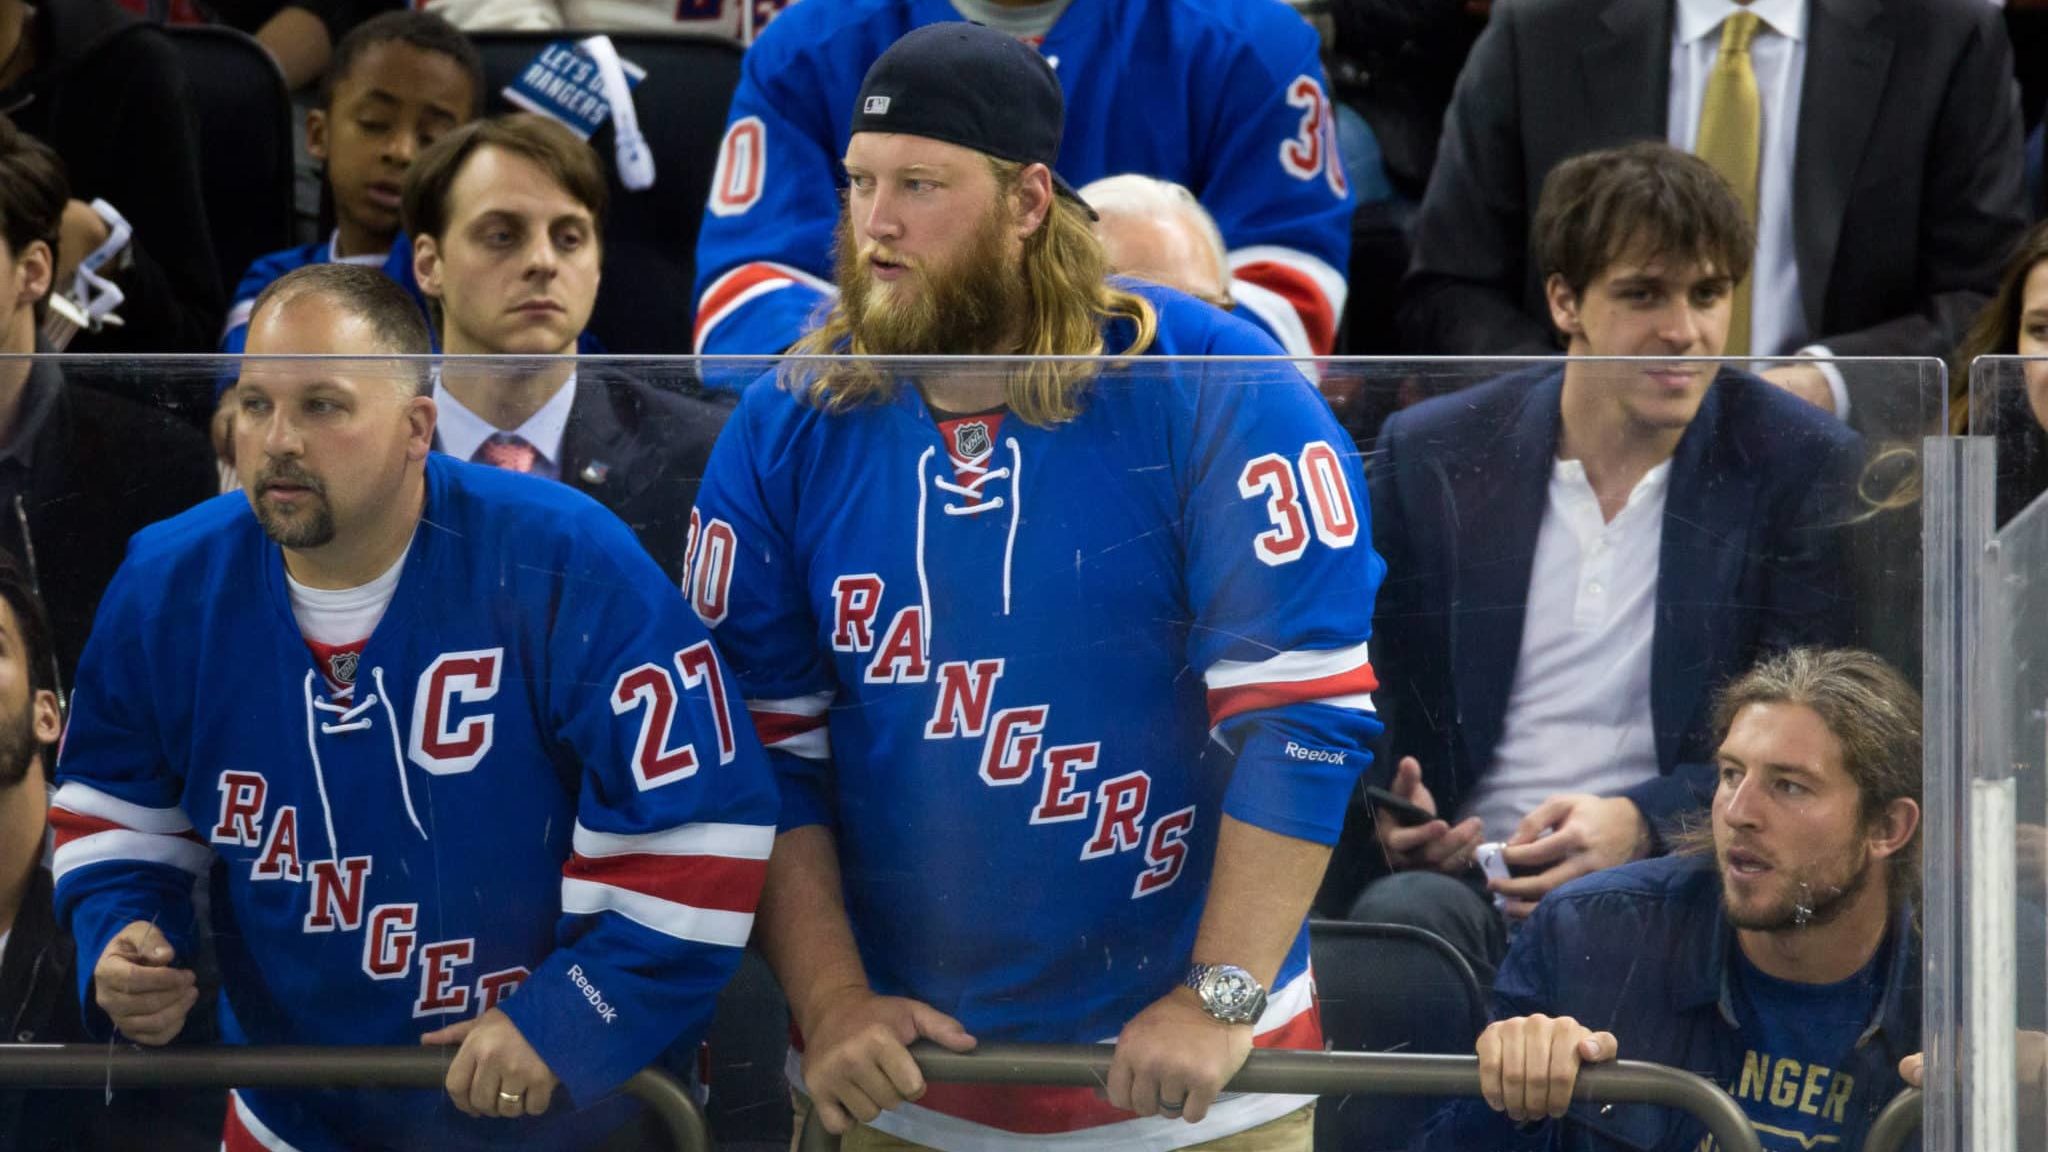 NEW YORK, NY - APRIL 19: Zac Sudfeld and Nick Mangold attend New York Rangers vs Pittsburgh Penuins at Madison Square Garden on April 19, 2016 in New York City.